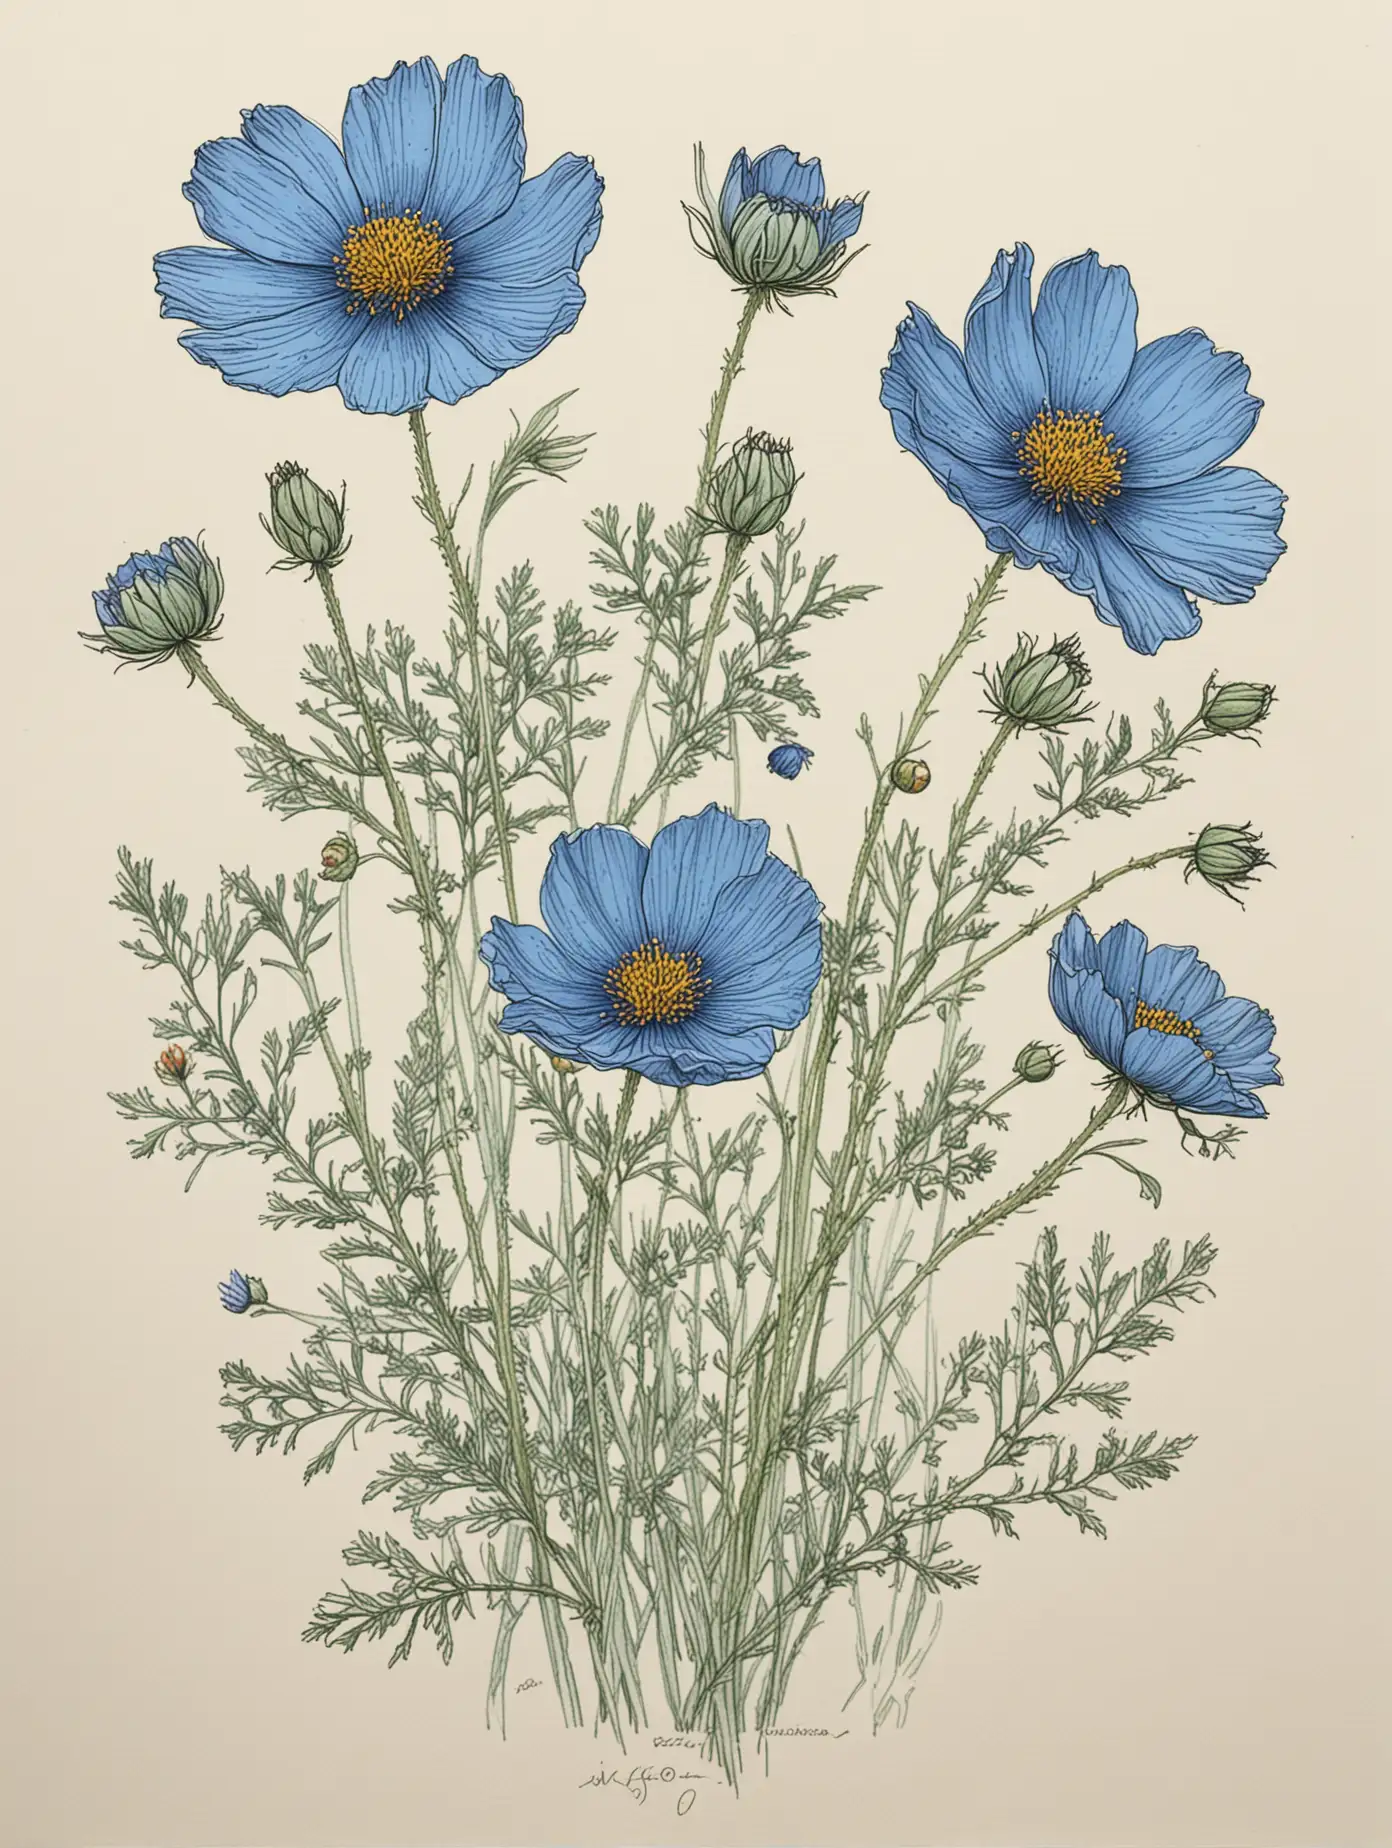 Blue Cosmos Flower Illustration Inspired by Audubons Style